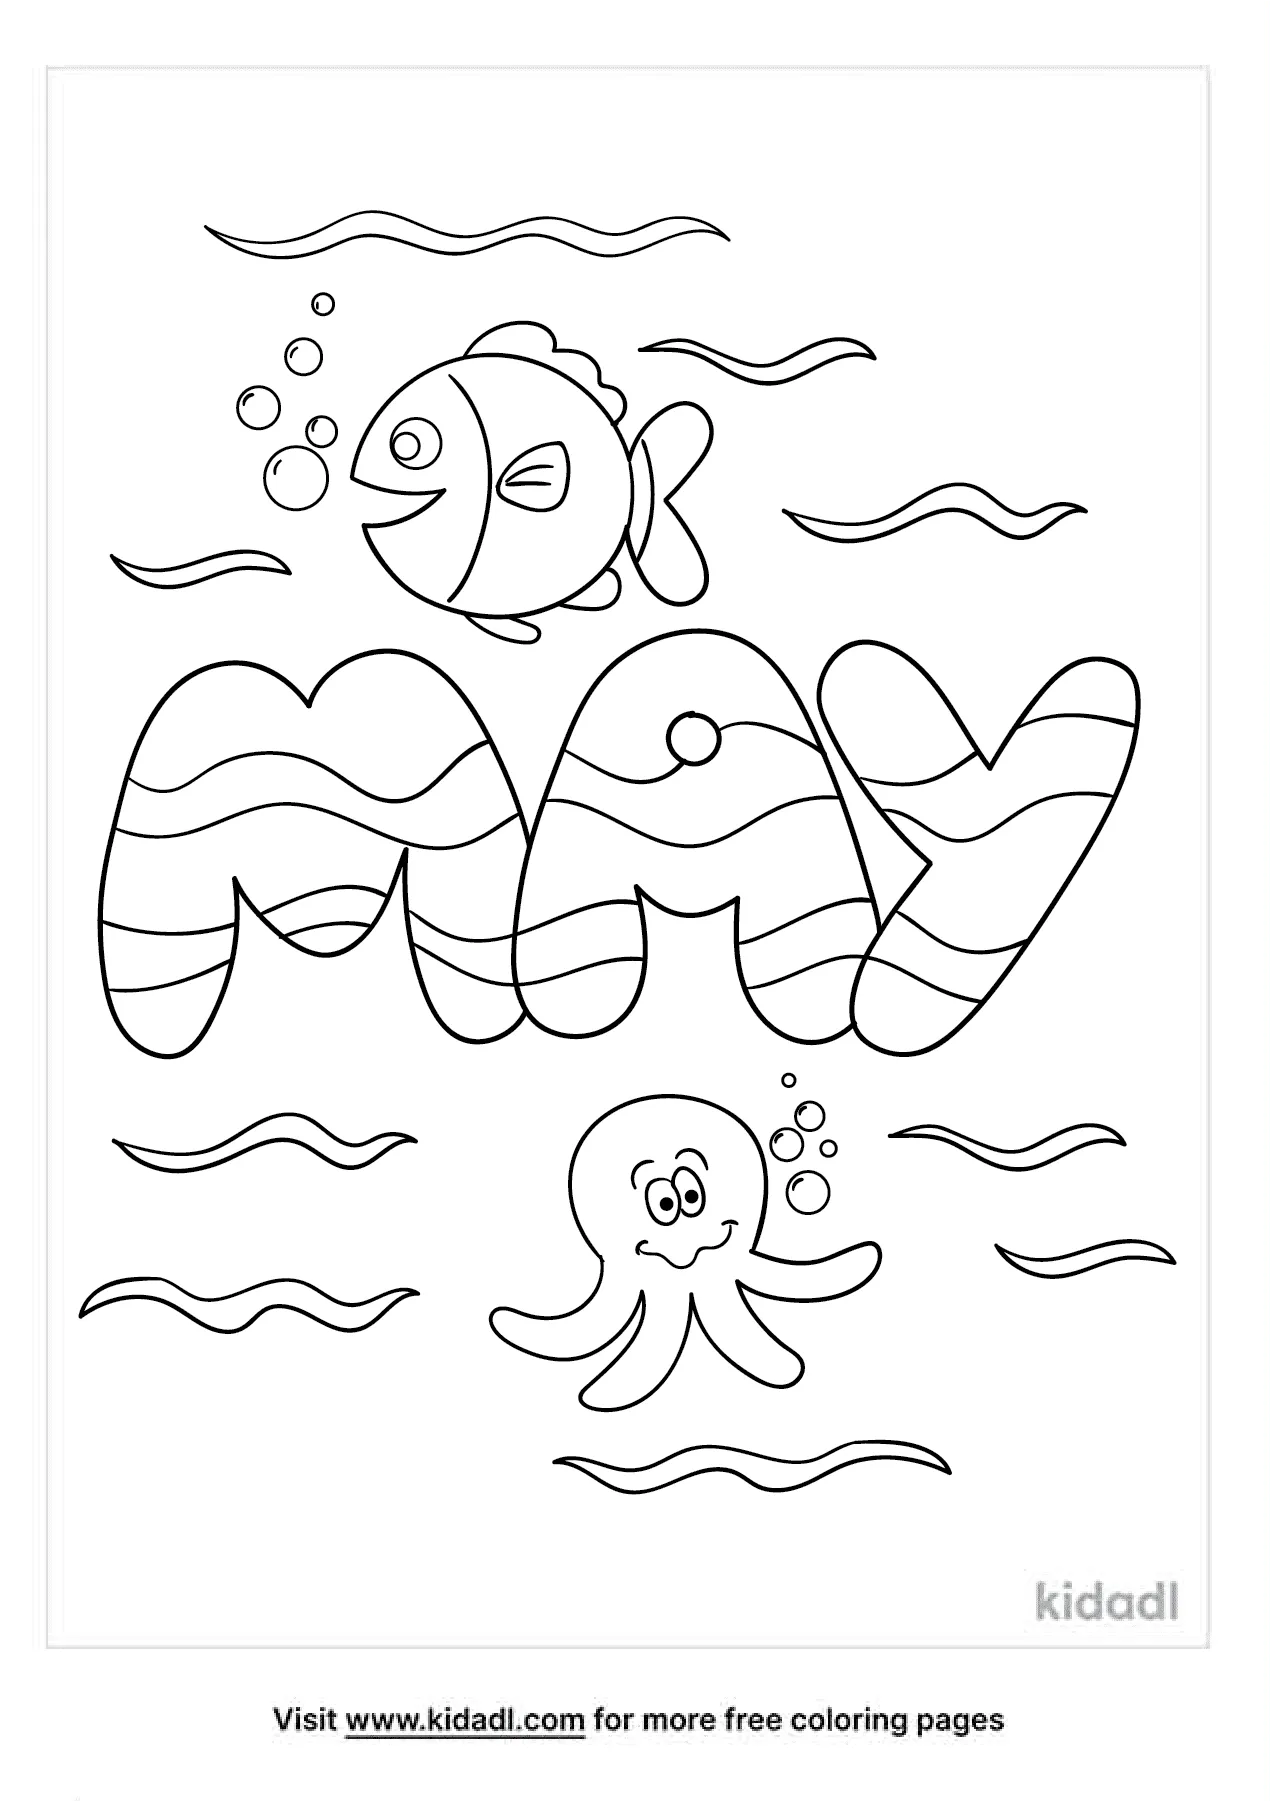 May Coloring Pages   Free Words and quotes Coloring Pages   Kidadl